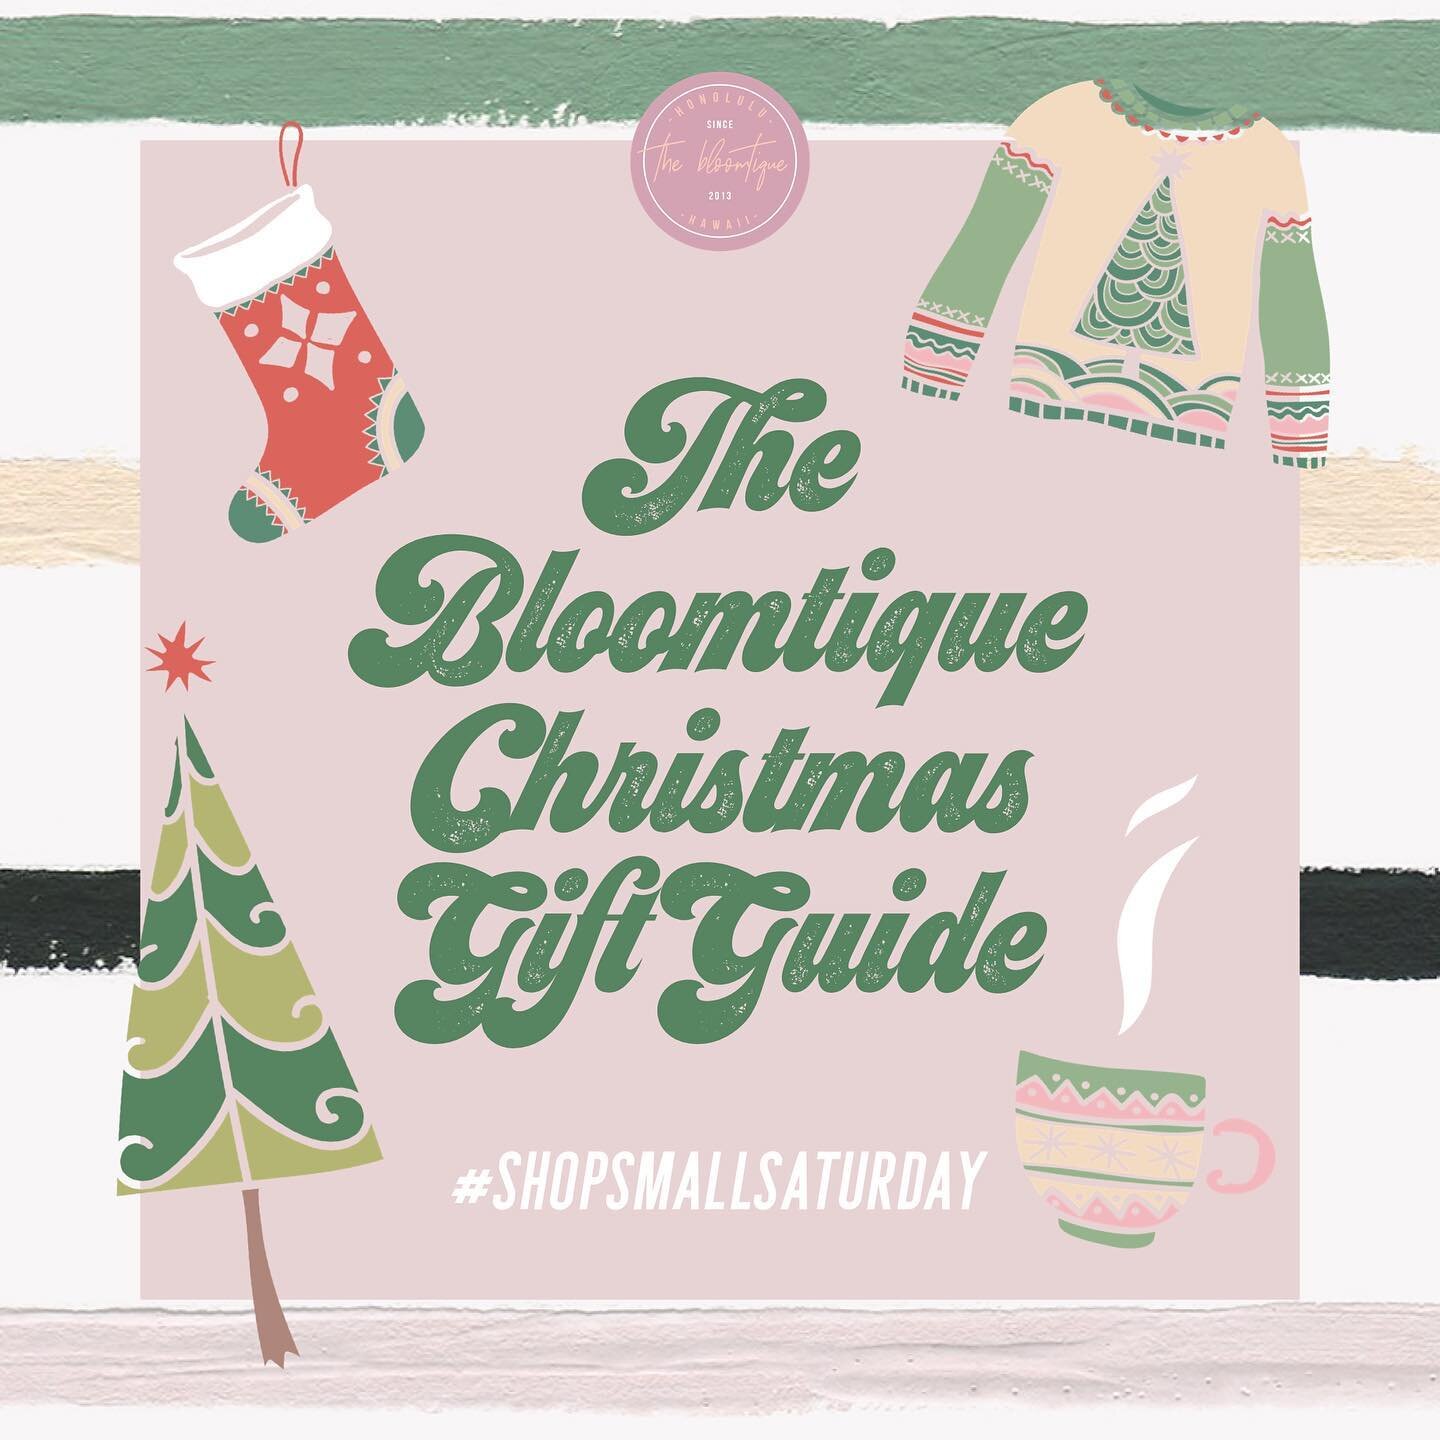 Our #ShopSmallSaturday Christmas Gift Guide is HERE!

Need help deciding what to get and staying on budget? We&rsquo;ve got some of the perfect gifts for you, your #GirlGang, for &ldquo;her&rdquo;, and for &ldquo;him&rdquo; no matter your price range